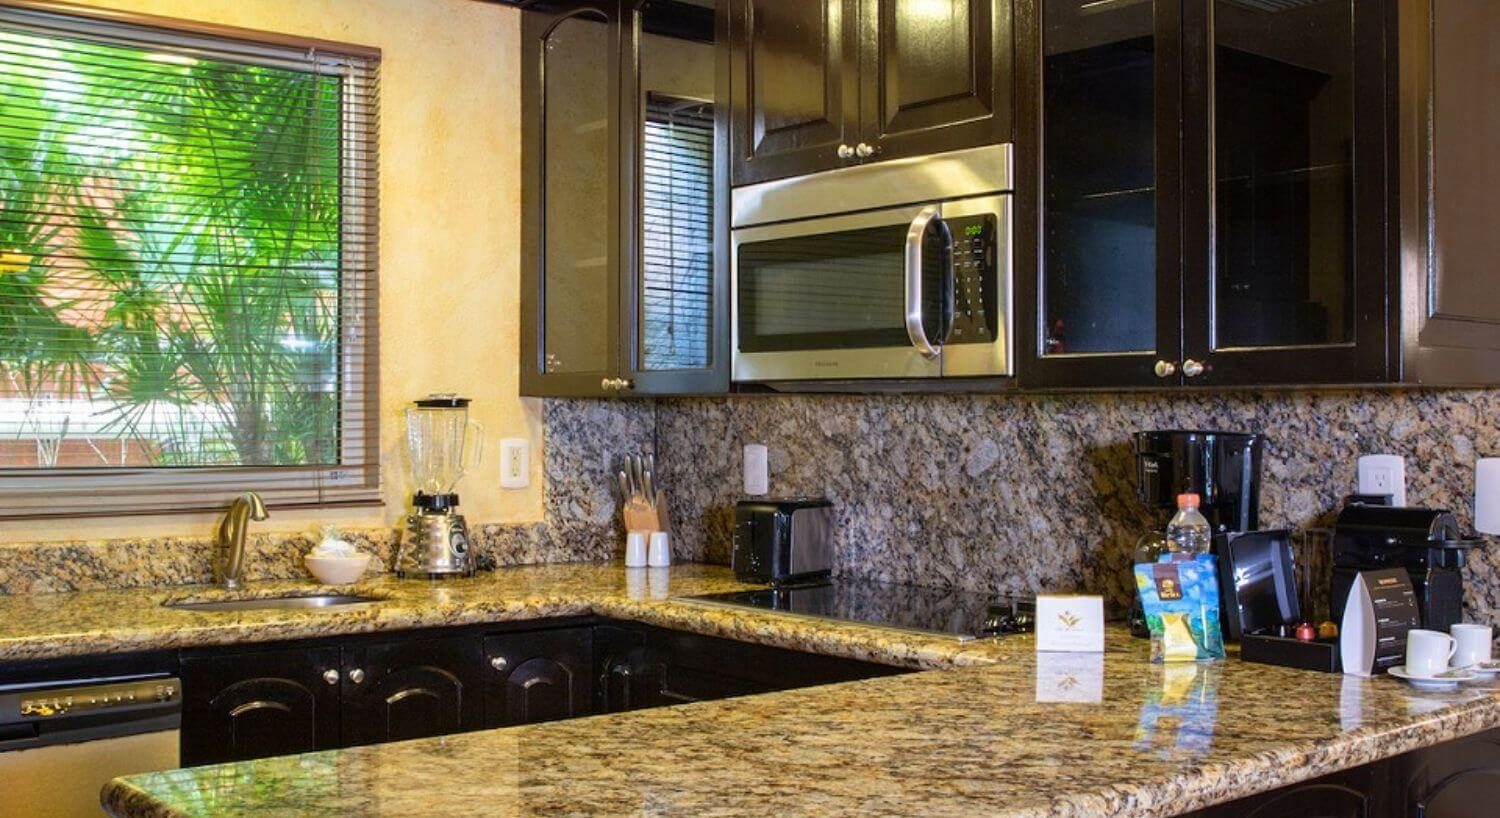 A U-shaped kitchen with granite countertops, dark brown cupboards, and stainless steel appliances.